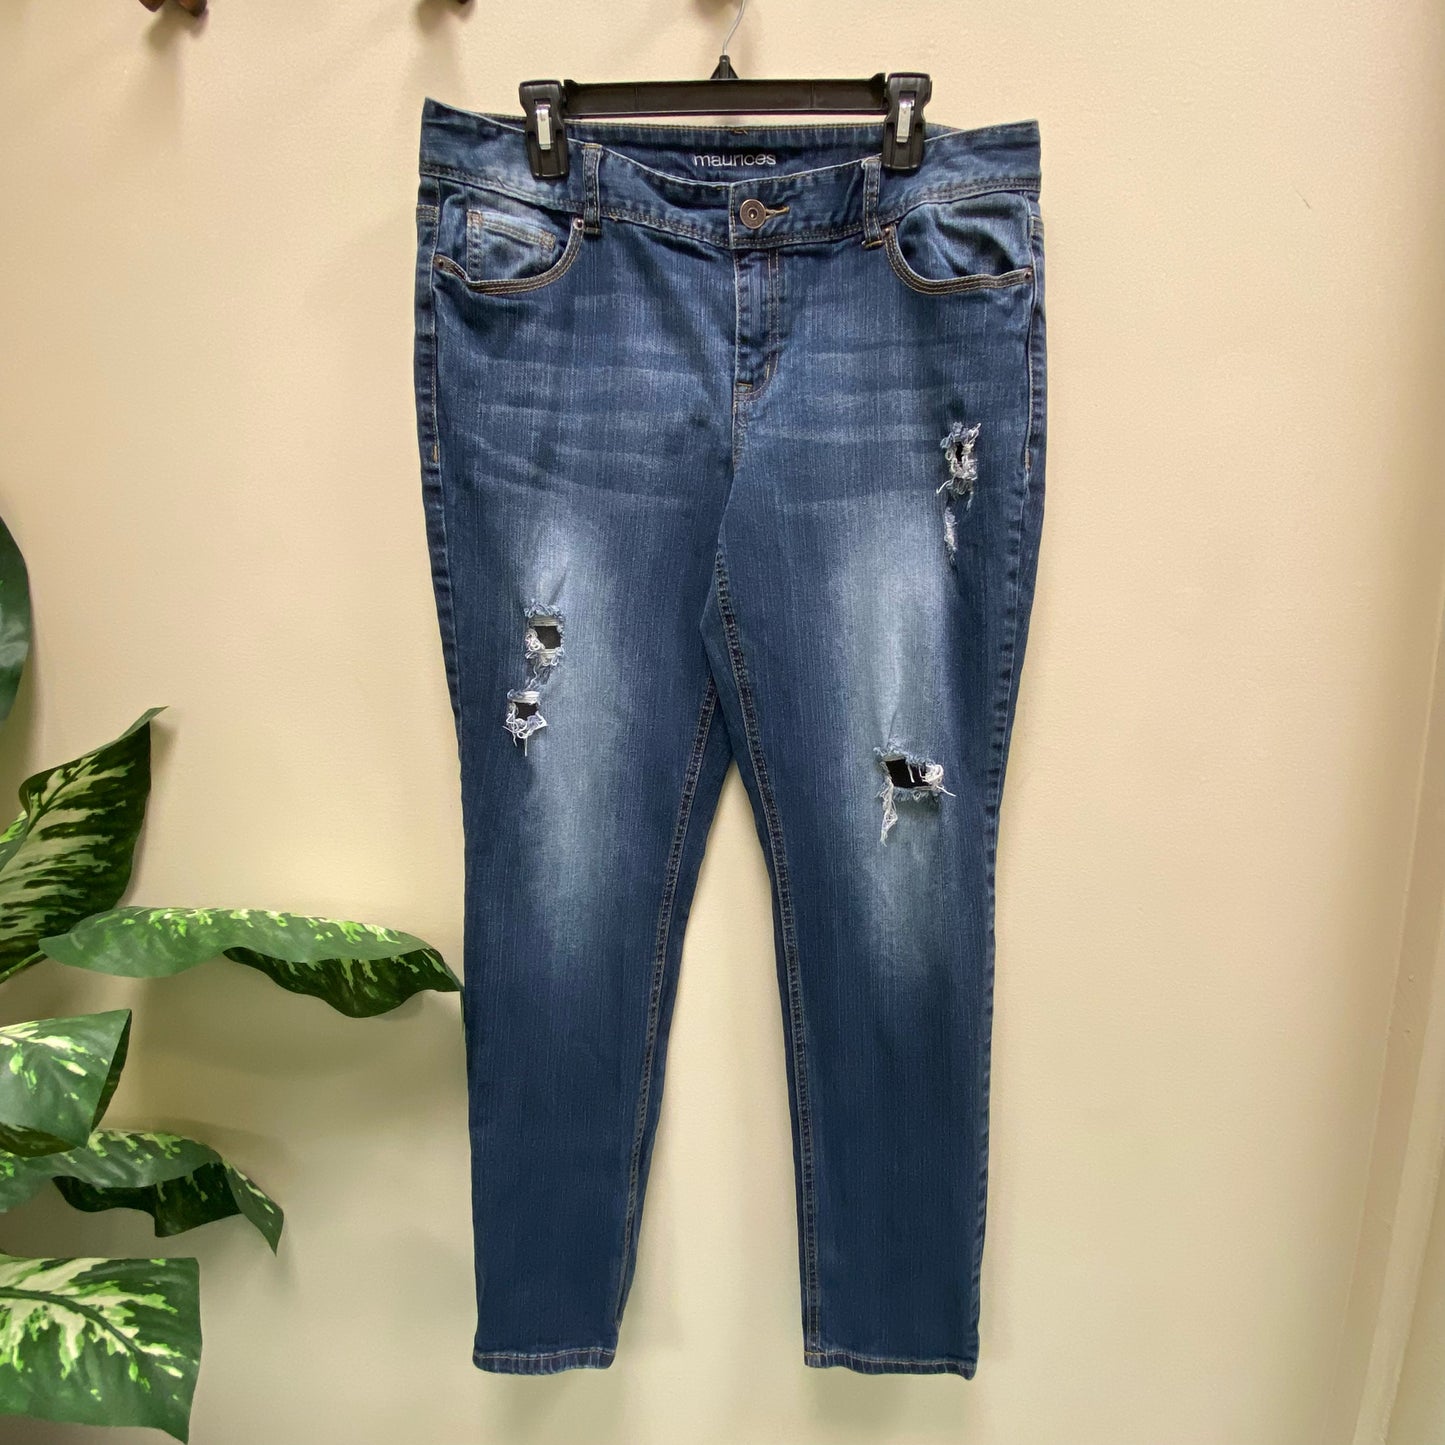 Maurices Jeans - Size 11/12